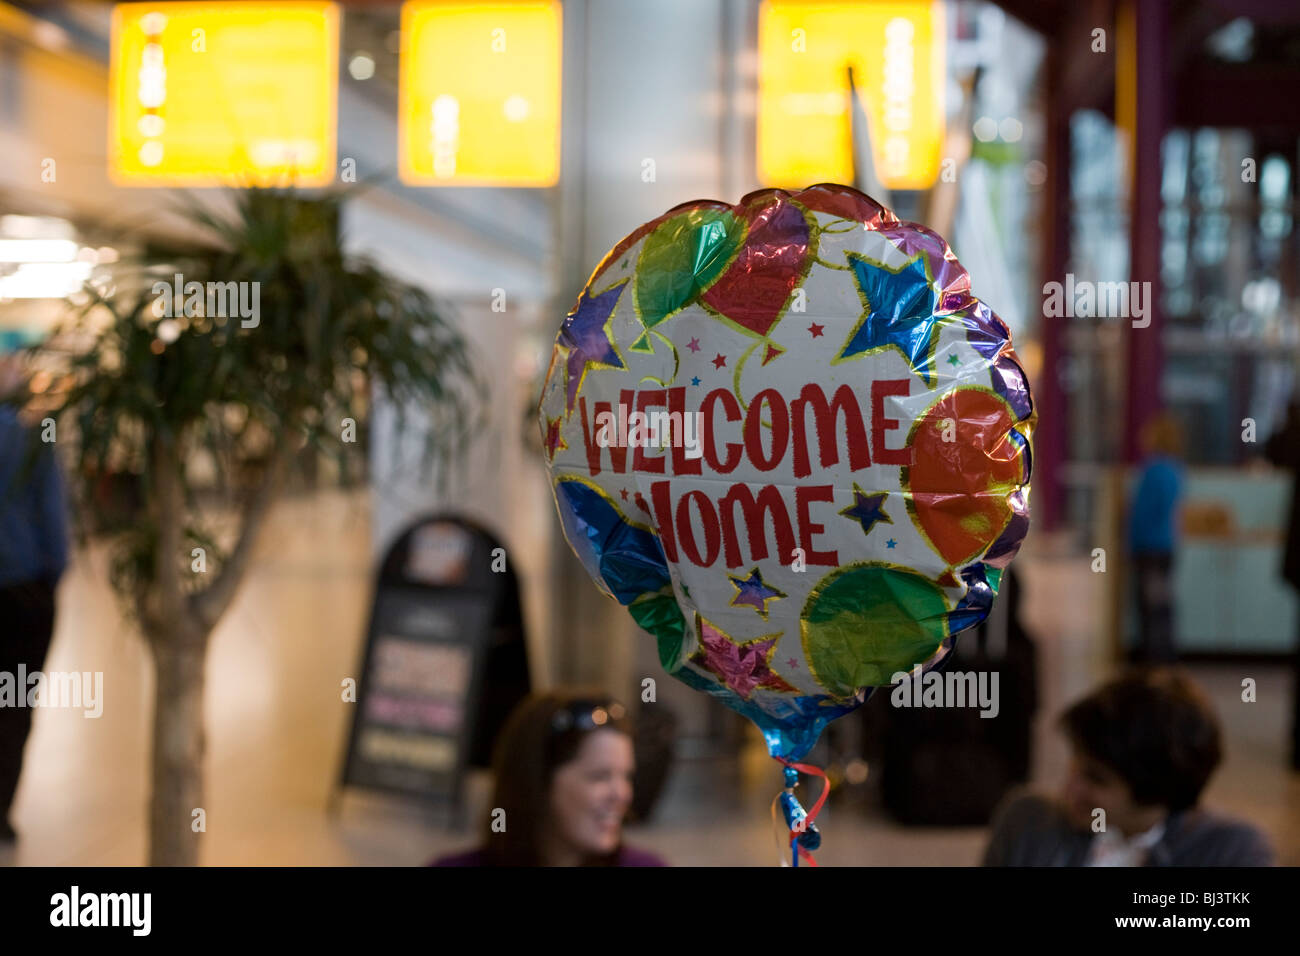 A helium-filled Welcome Home balloon floats in the air in Heathrow Airport's Terminal 5 arrivals hall. Stock Photo